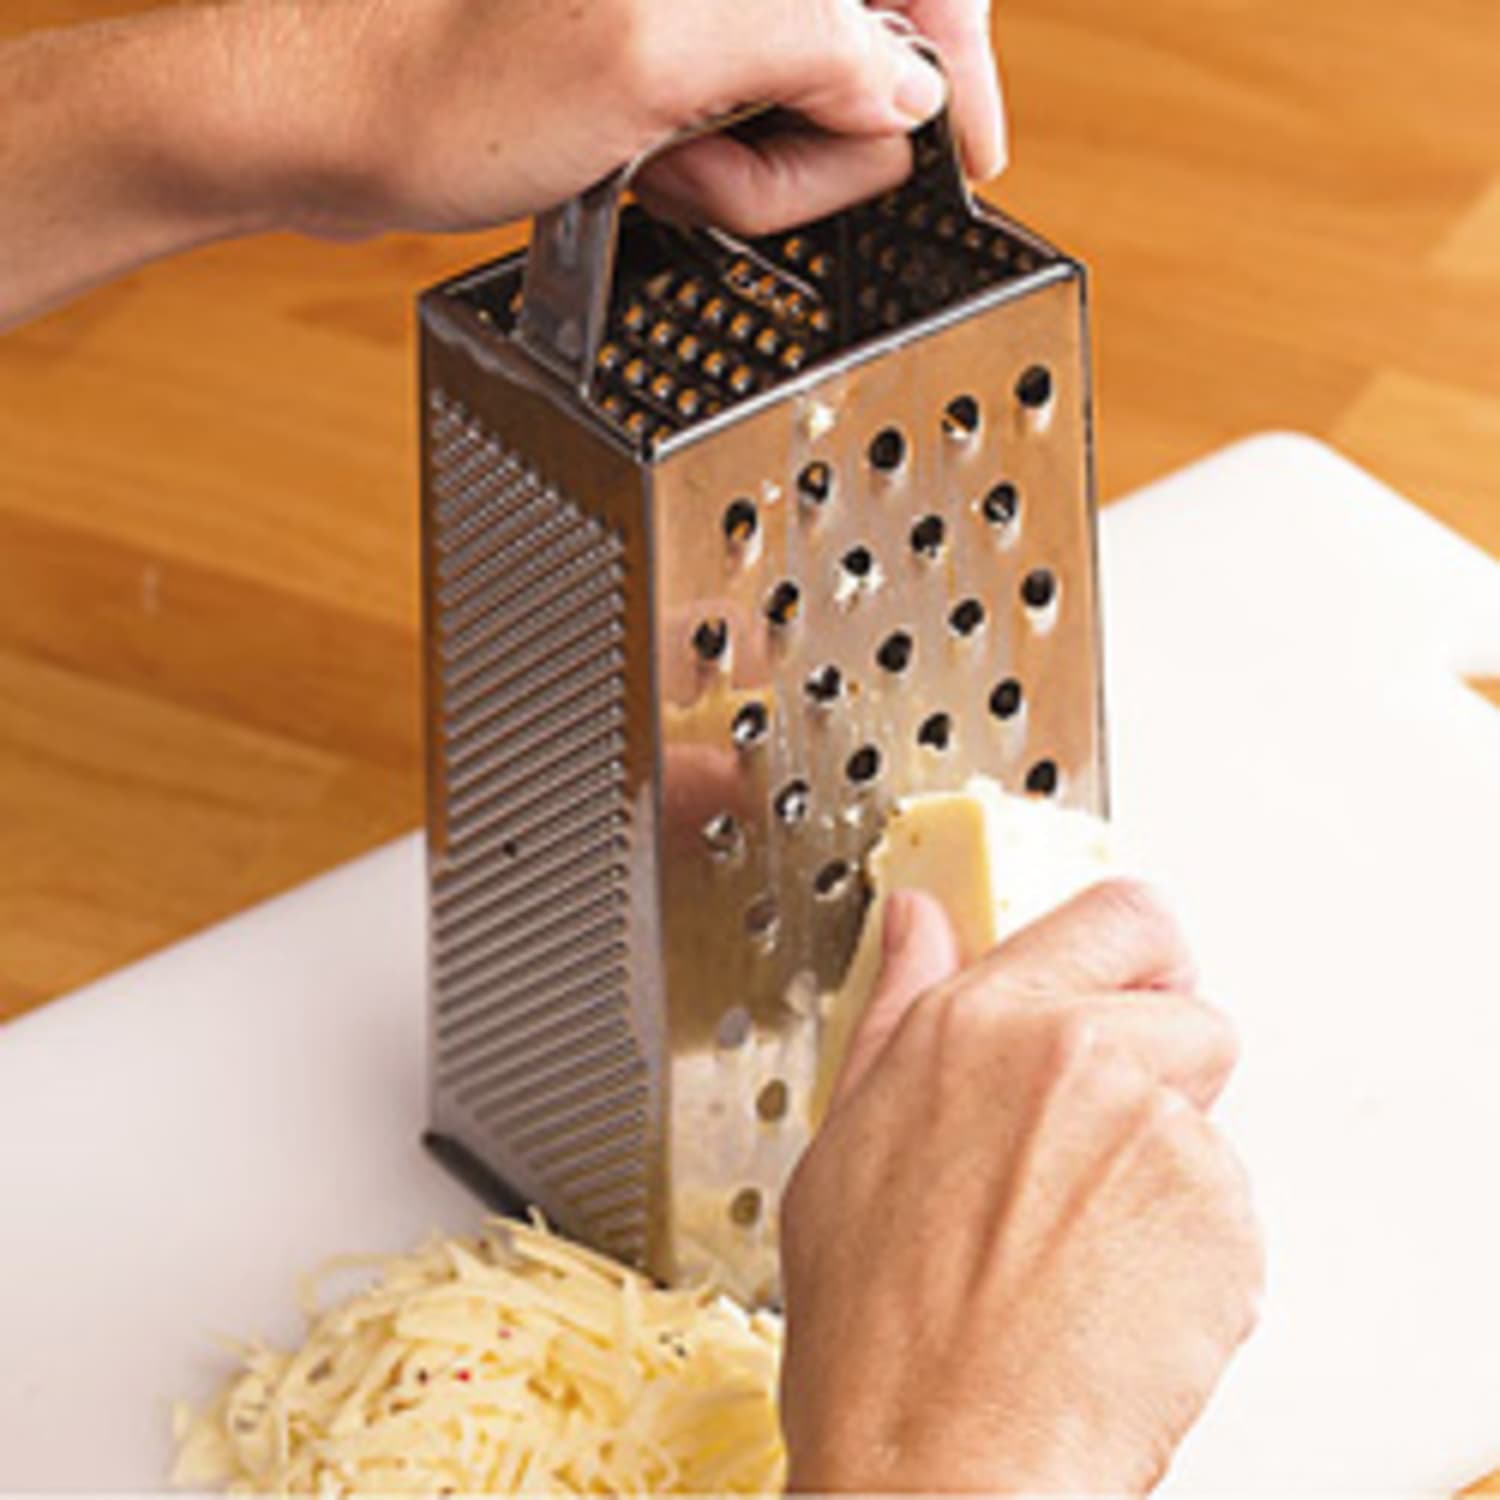 Soap Plus a Cheese Grater Makes an Award-Winning Design for